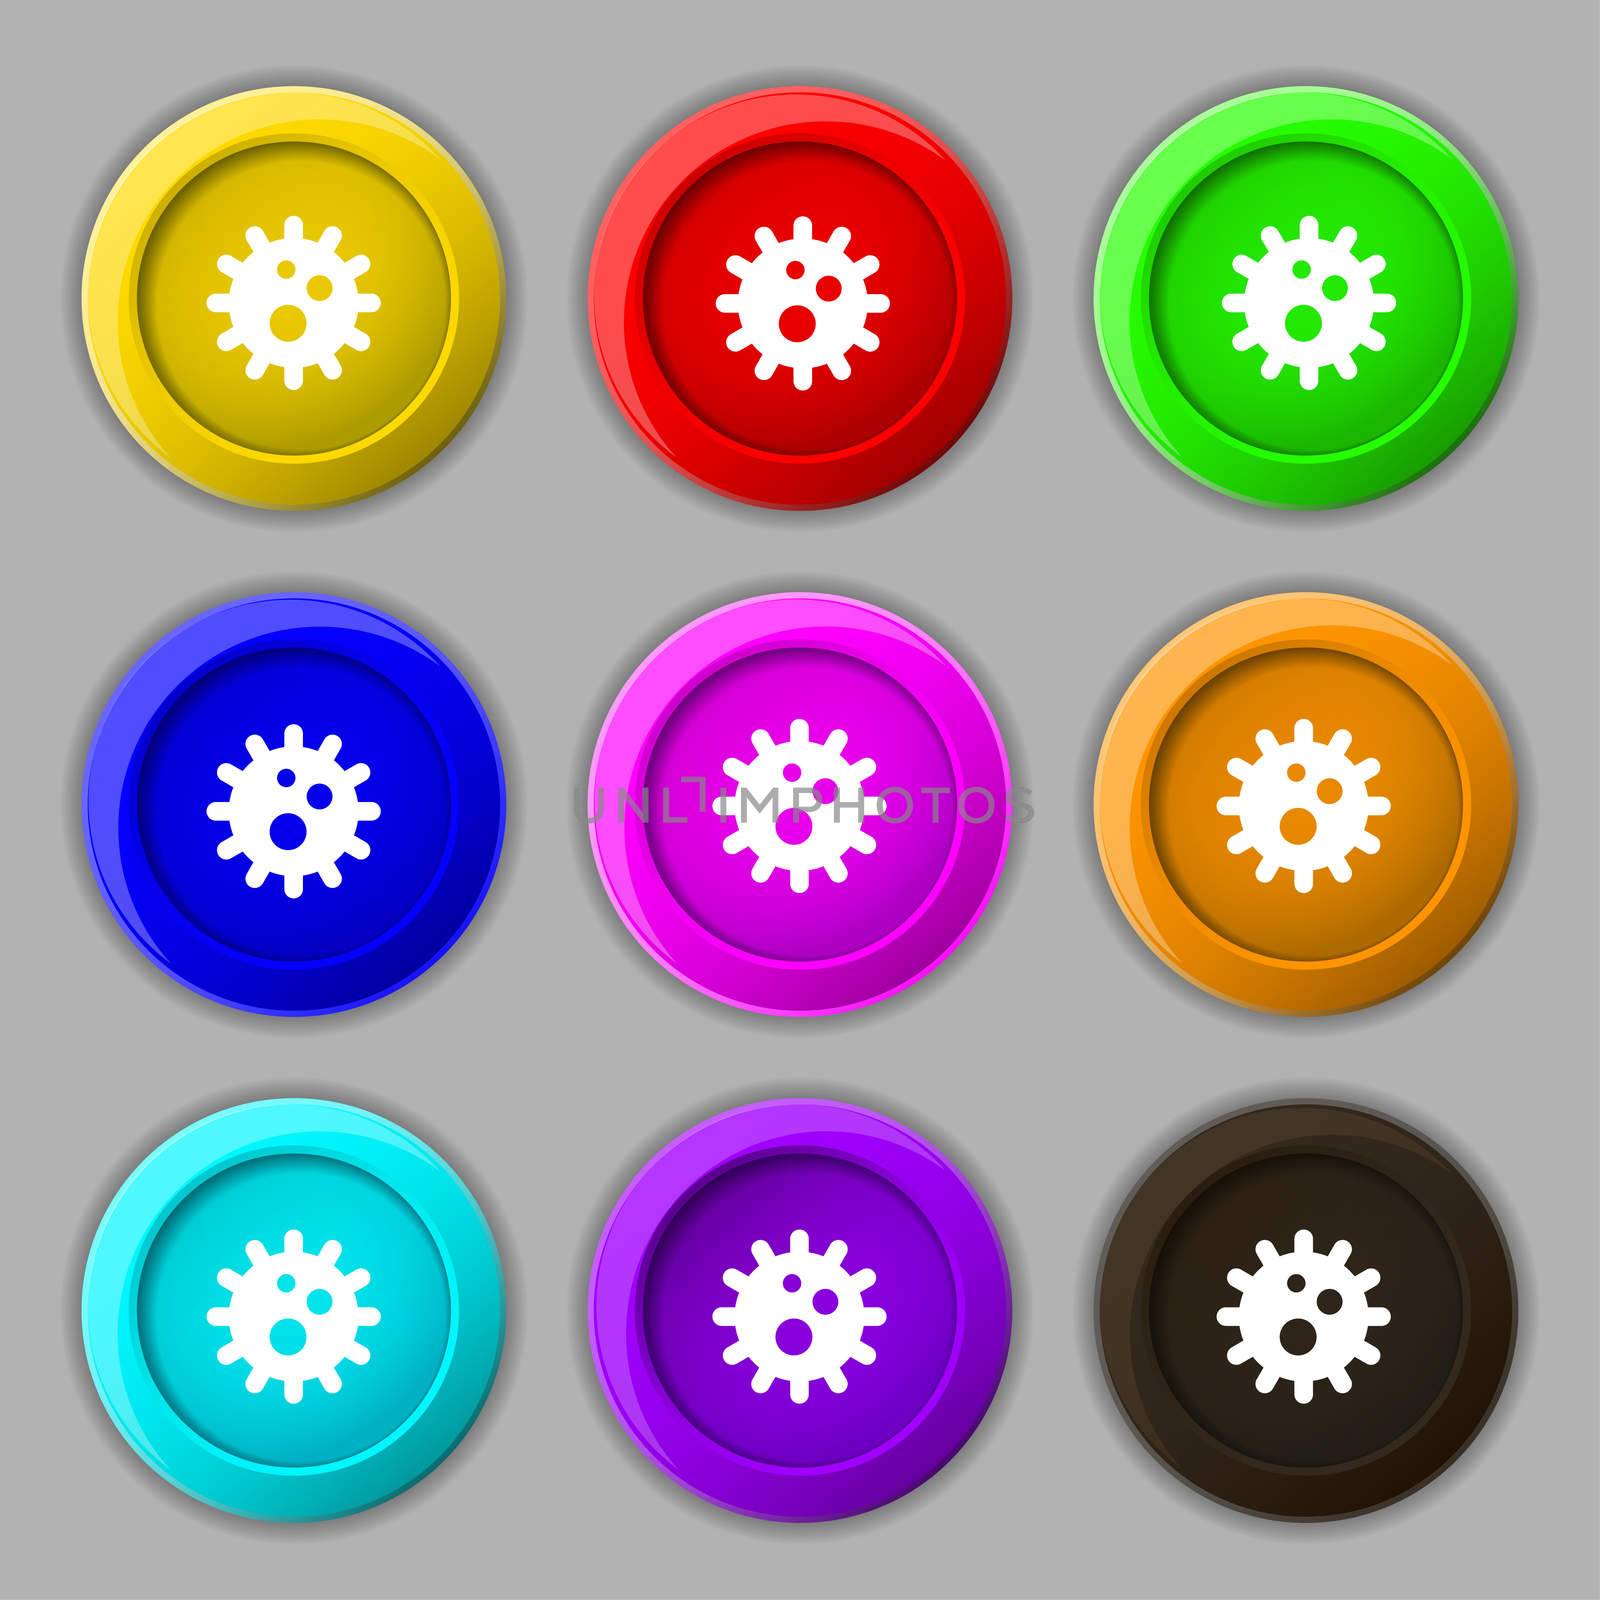 naval mine icon sign. symbol on nine round colourful buttons. illustration